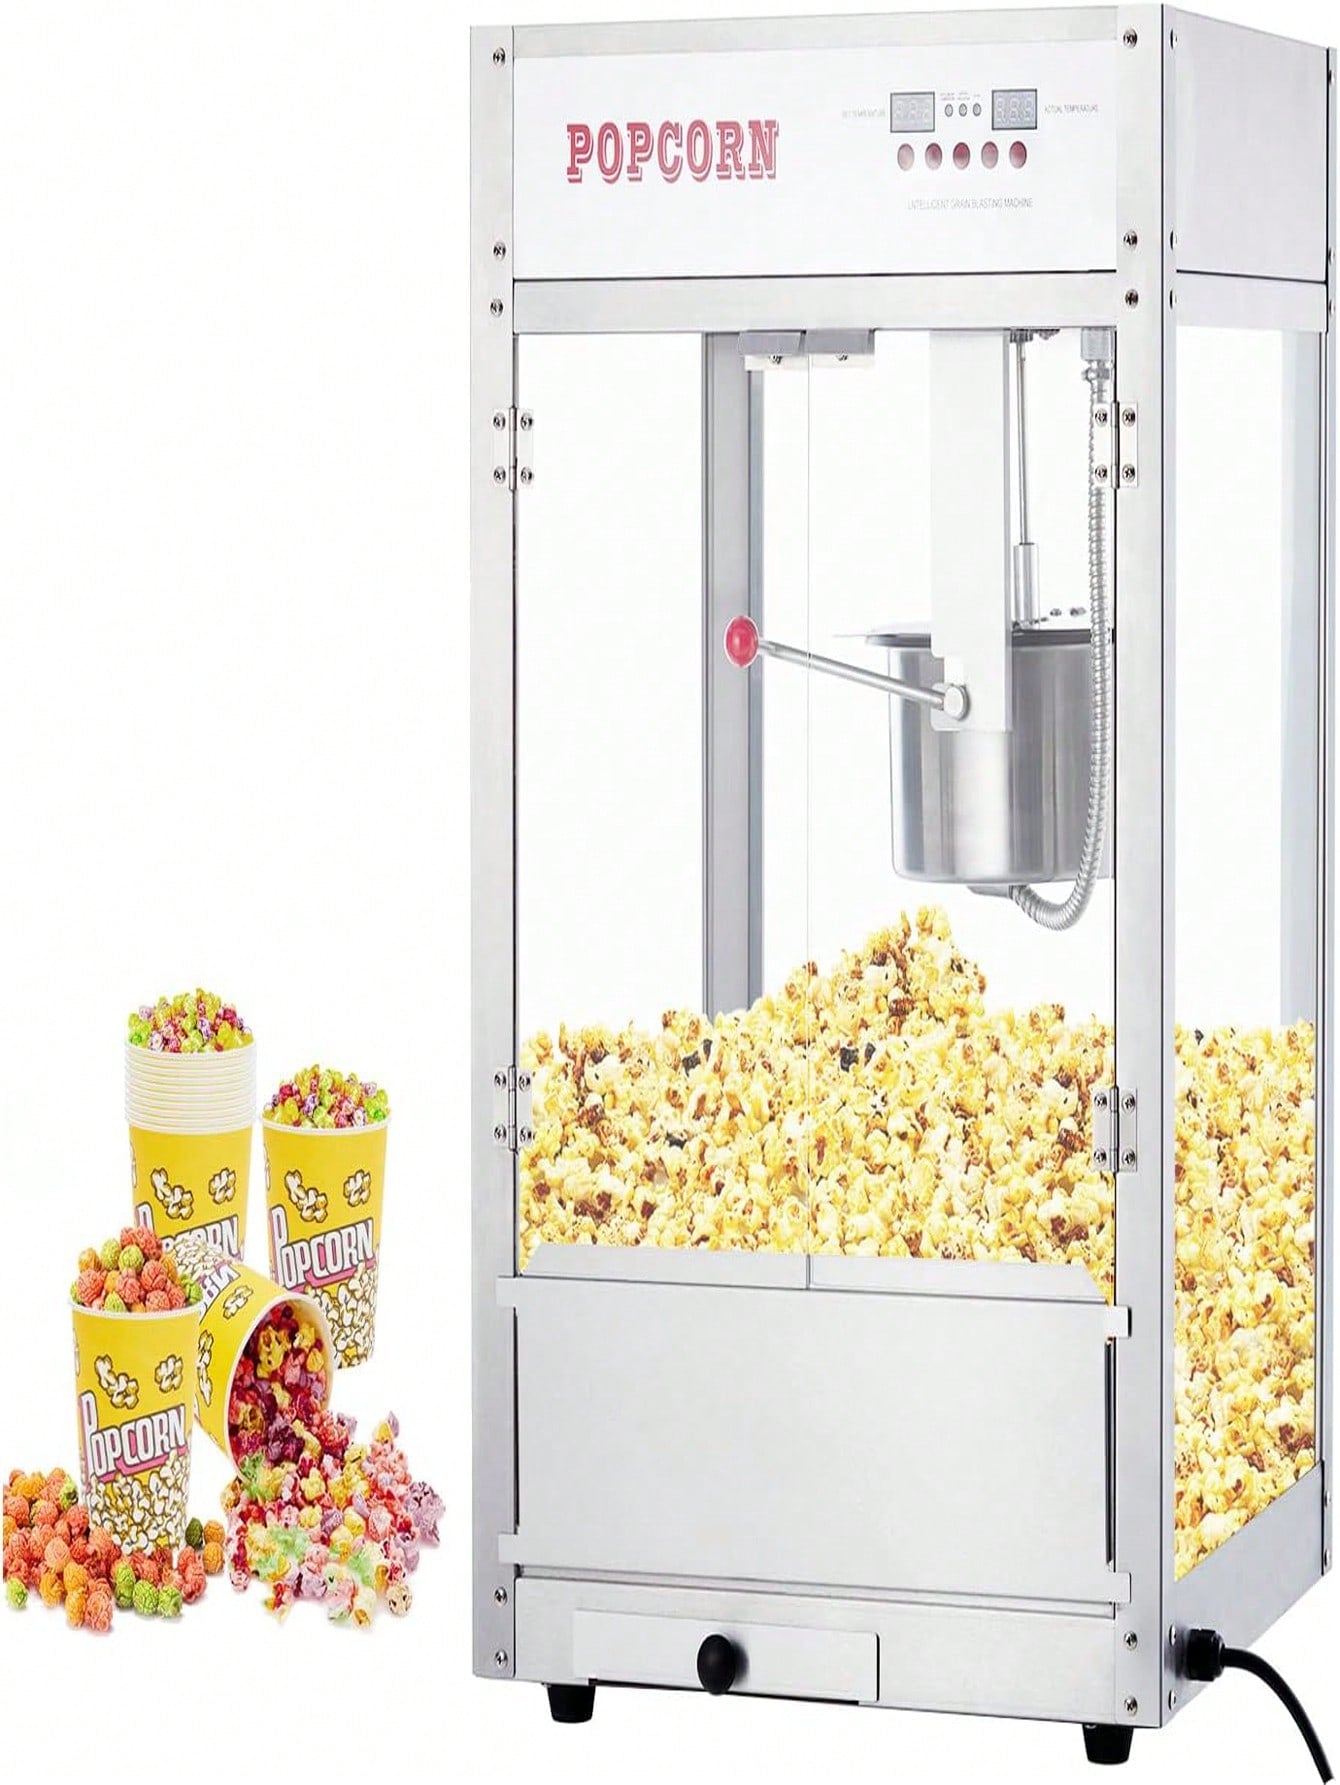 8 Oz Popcorn Machine With Temperature Control And Digital Display - Movie  Theater Style Popcorn Popper With 10 Pack Popcorn Buckets For Movie Night